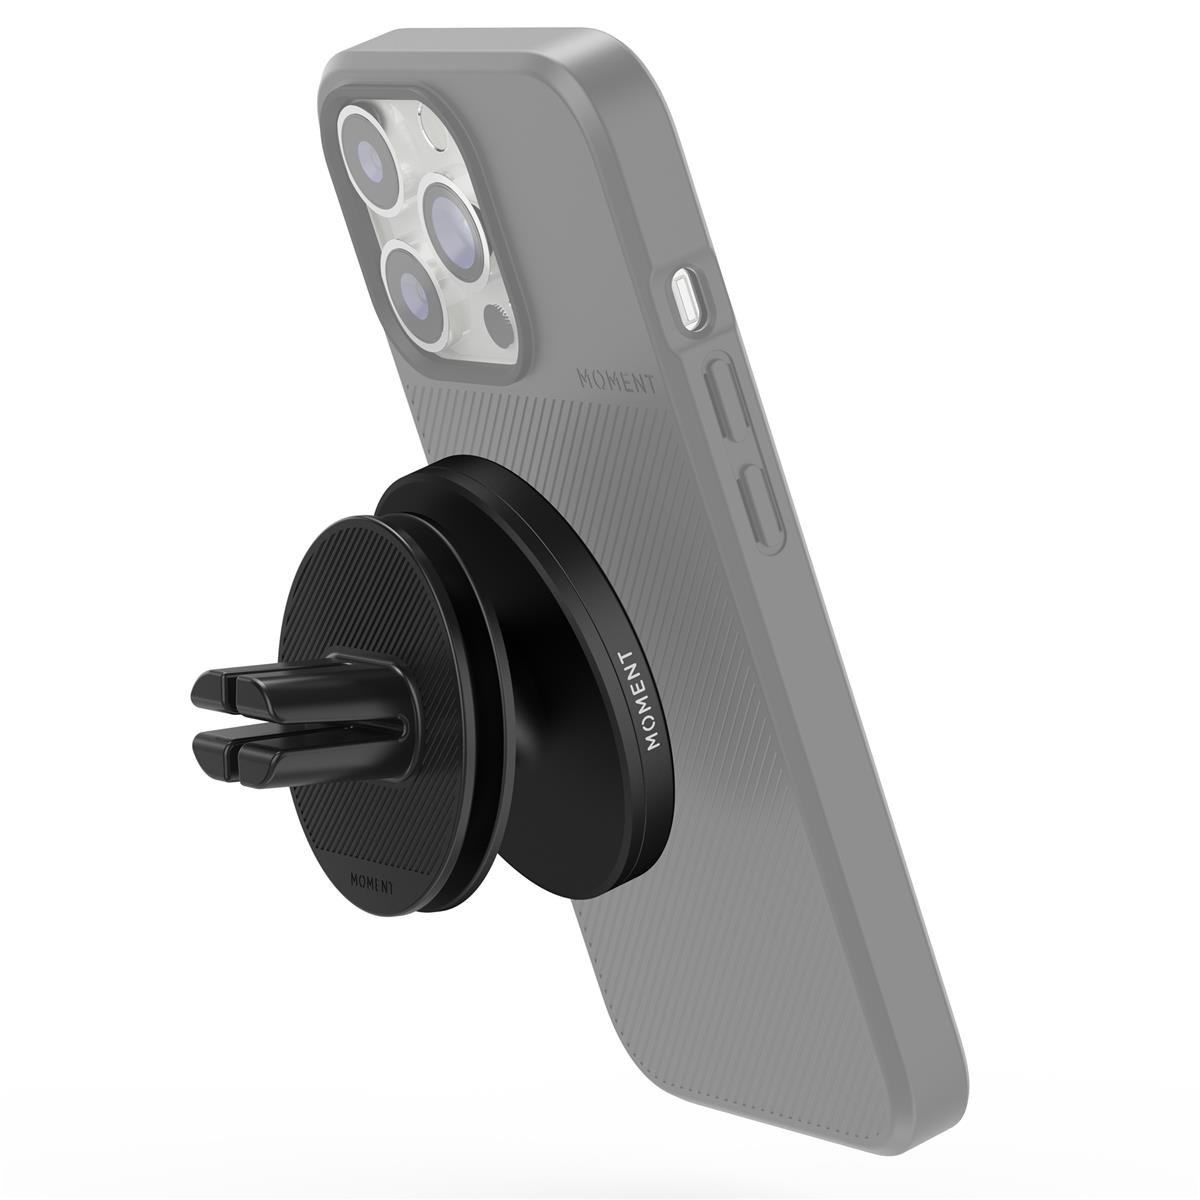 Image of Moment Adjustable Car Vent Mount with MagSafe for iPhone 12 and 13